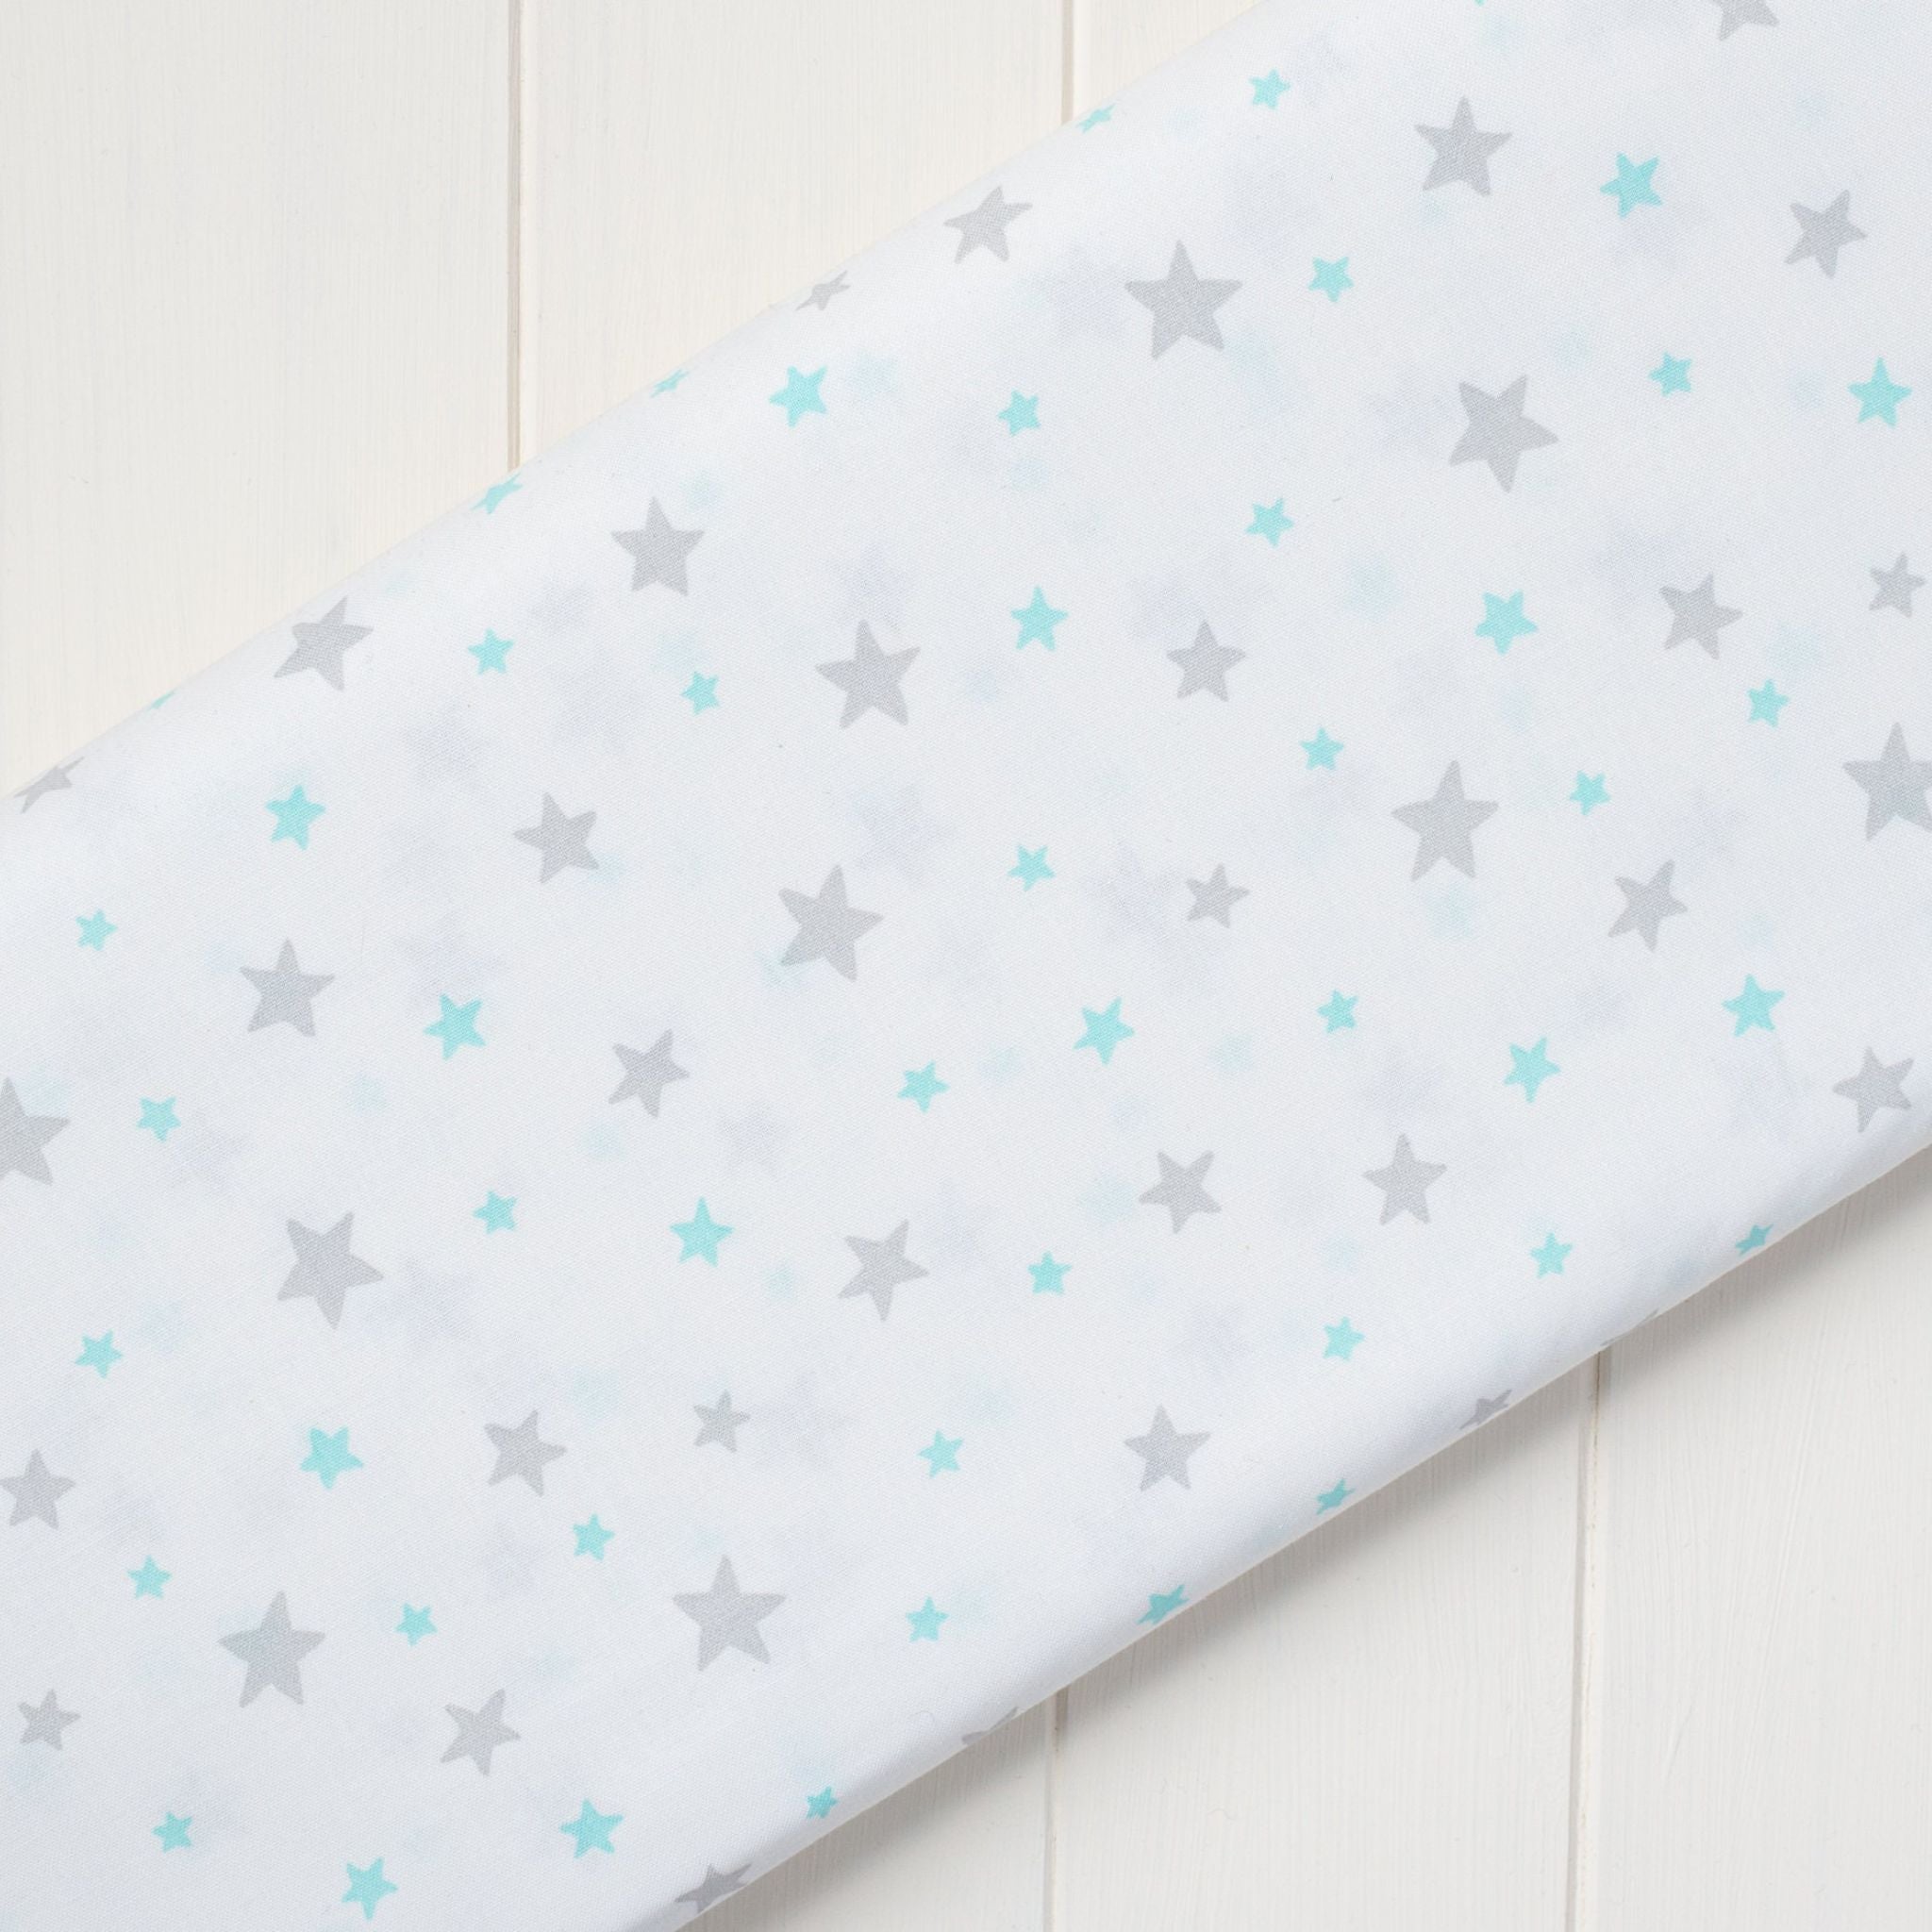 Blue and grey stars on white cotton fabric - 'Good Night' Fabric Editions